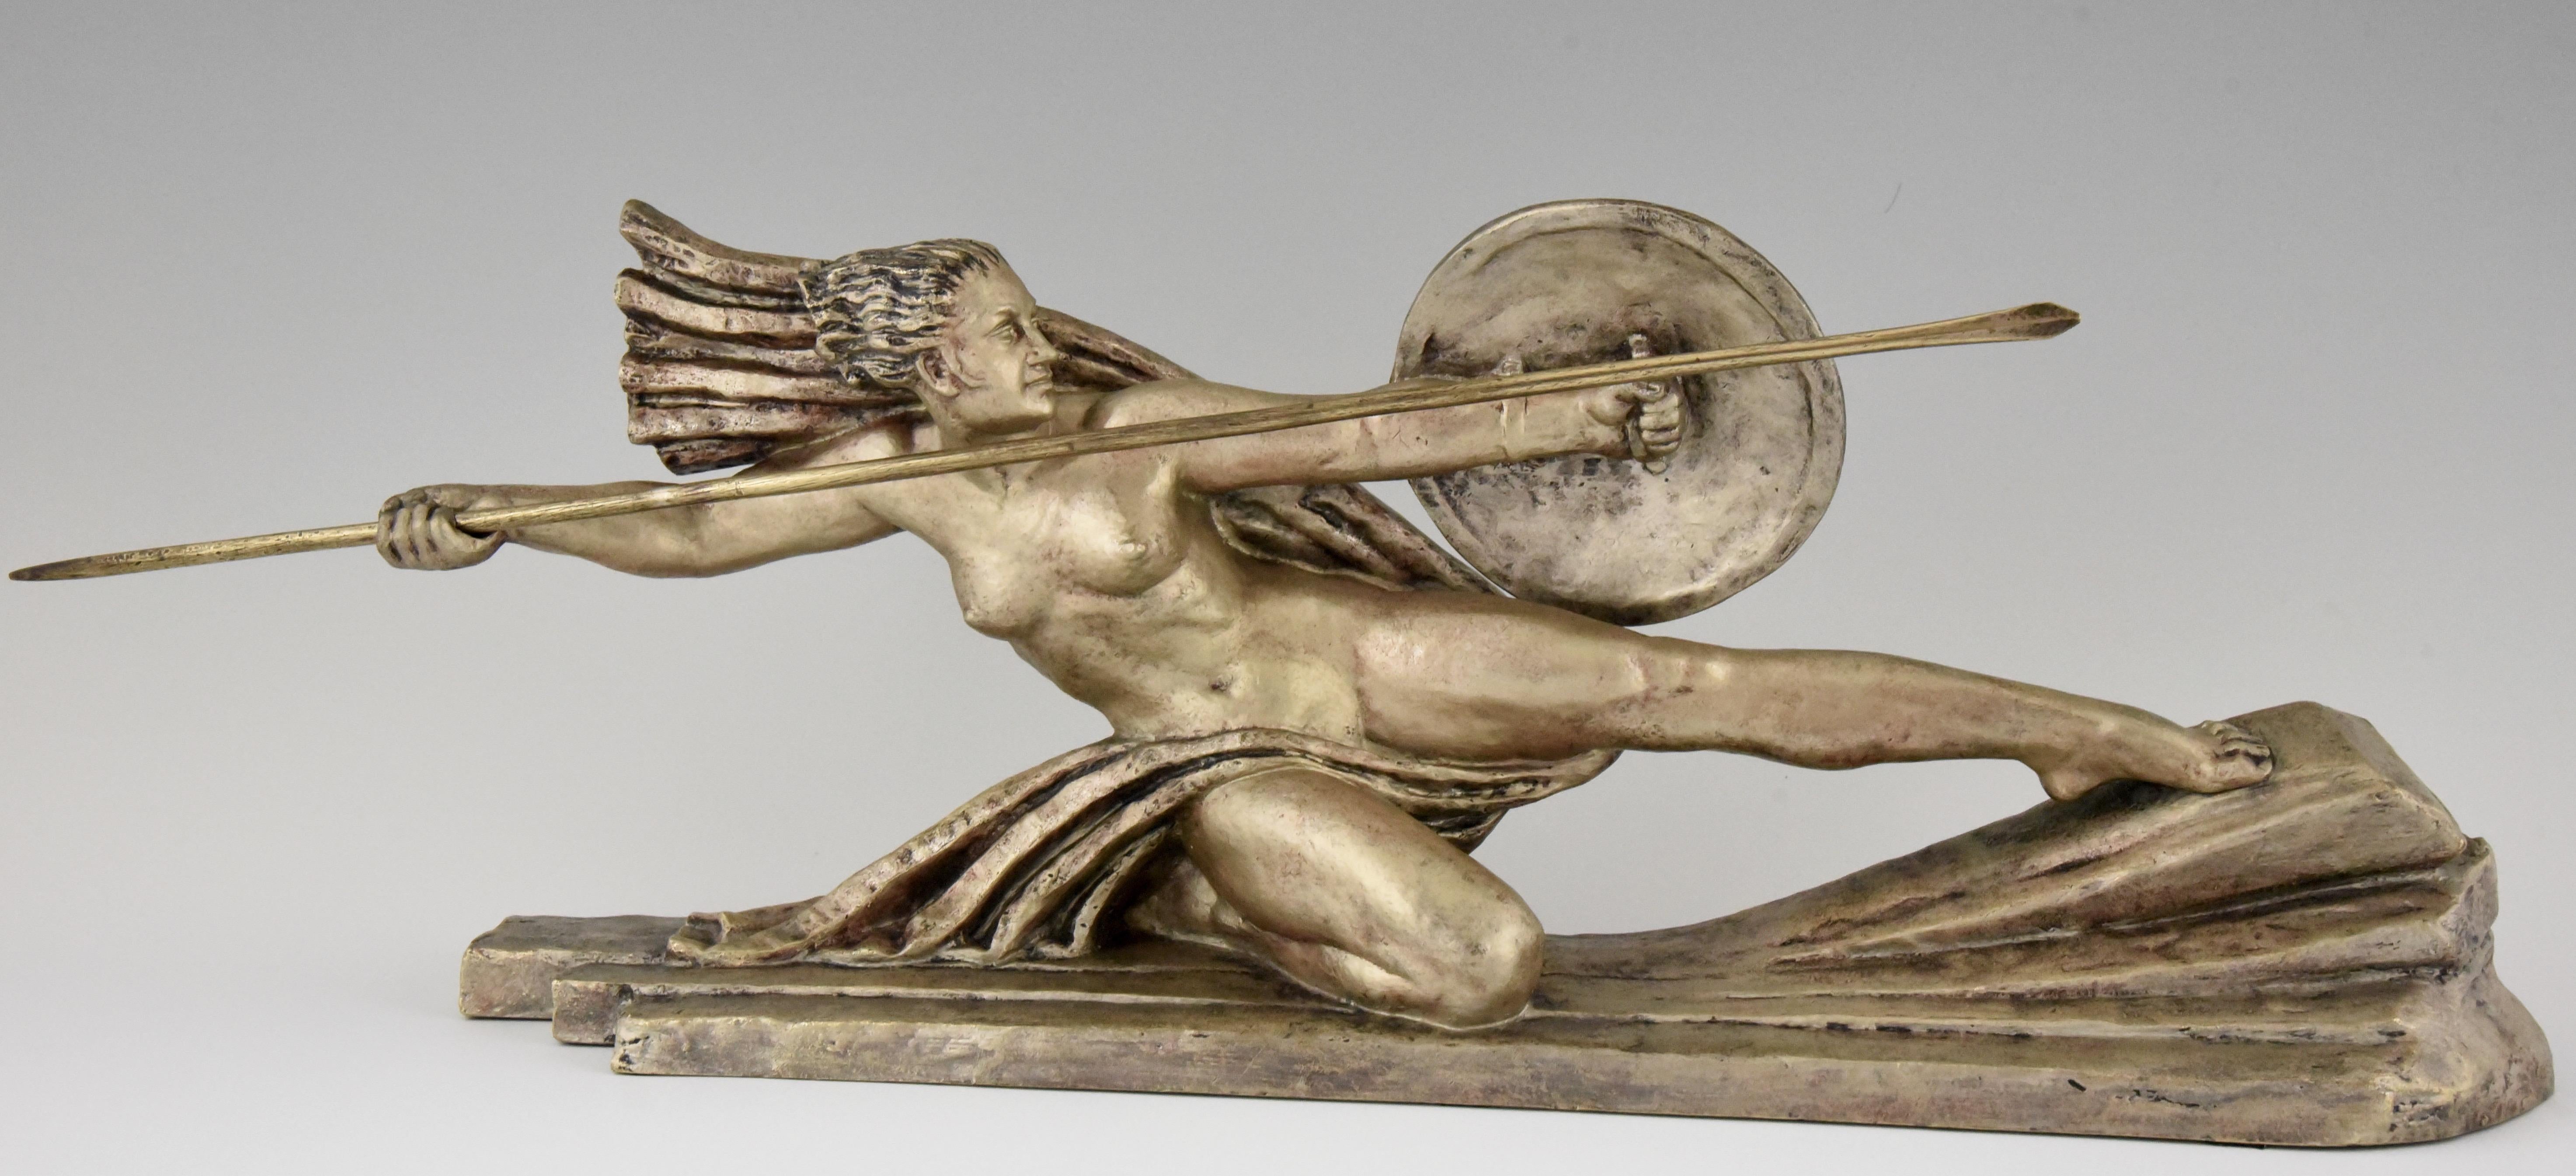 Amazone, beautiful Art Deco bronze sculpture of a female nude warrior with spear and shield by the French sculptor Marcel André Bouraine (1886-1948) France 1925

This bronze is illustrated in?“Art Deco sculpture” by Victor Arwas, Academy.?General